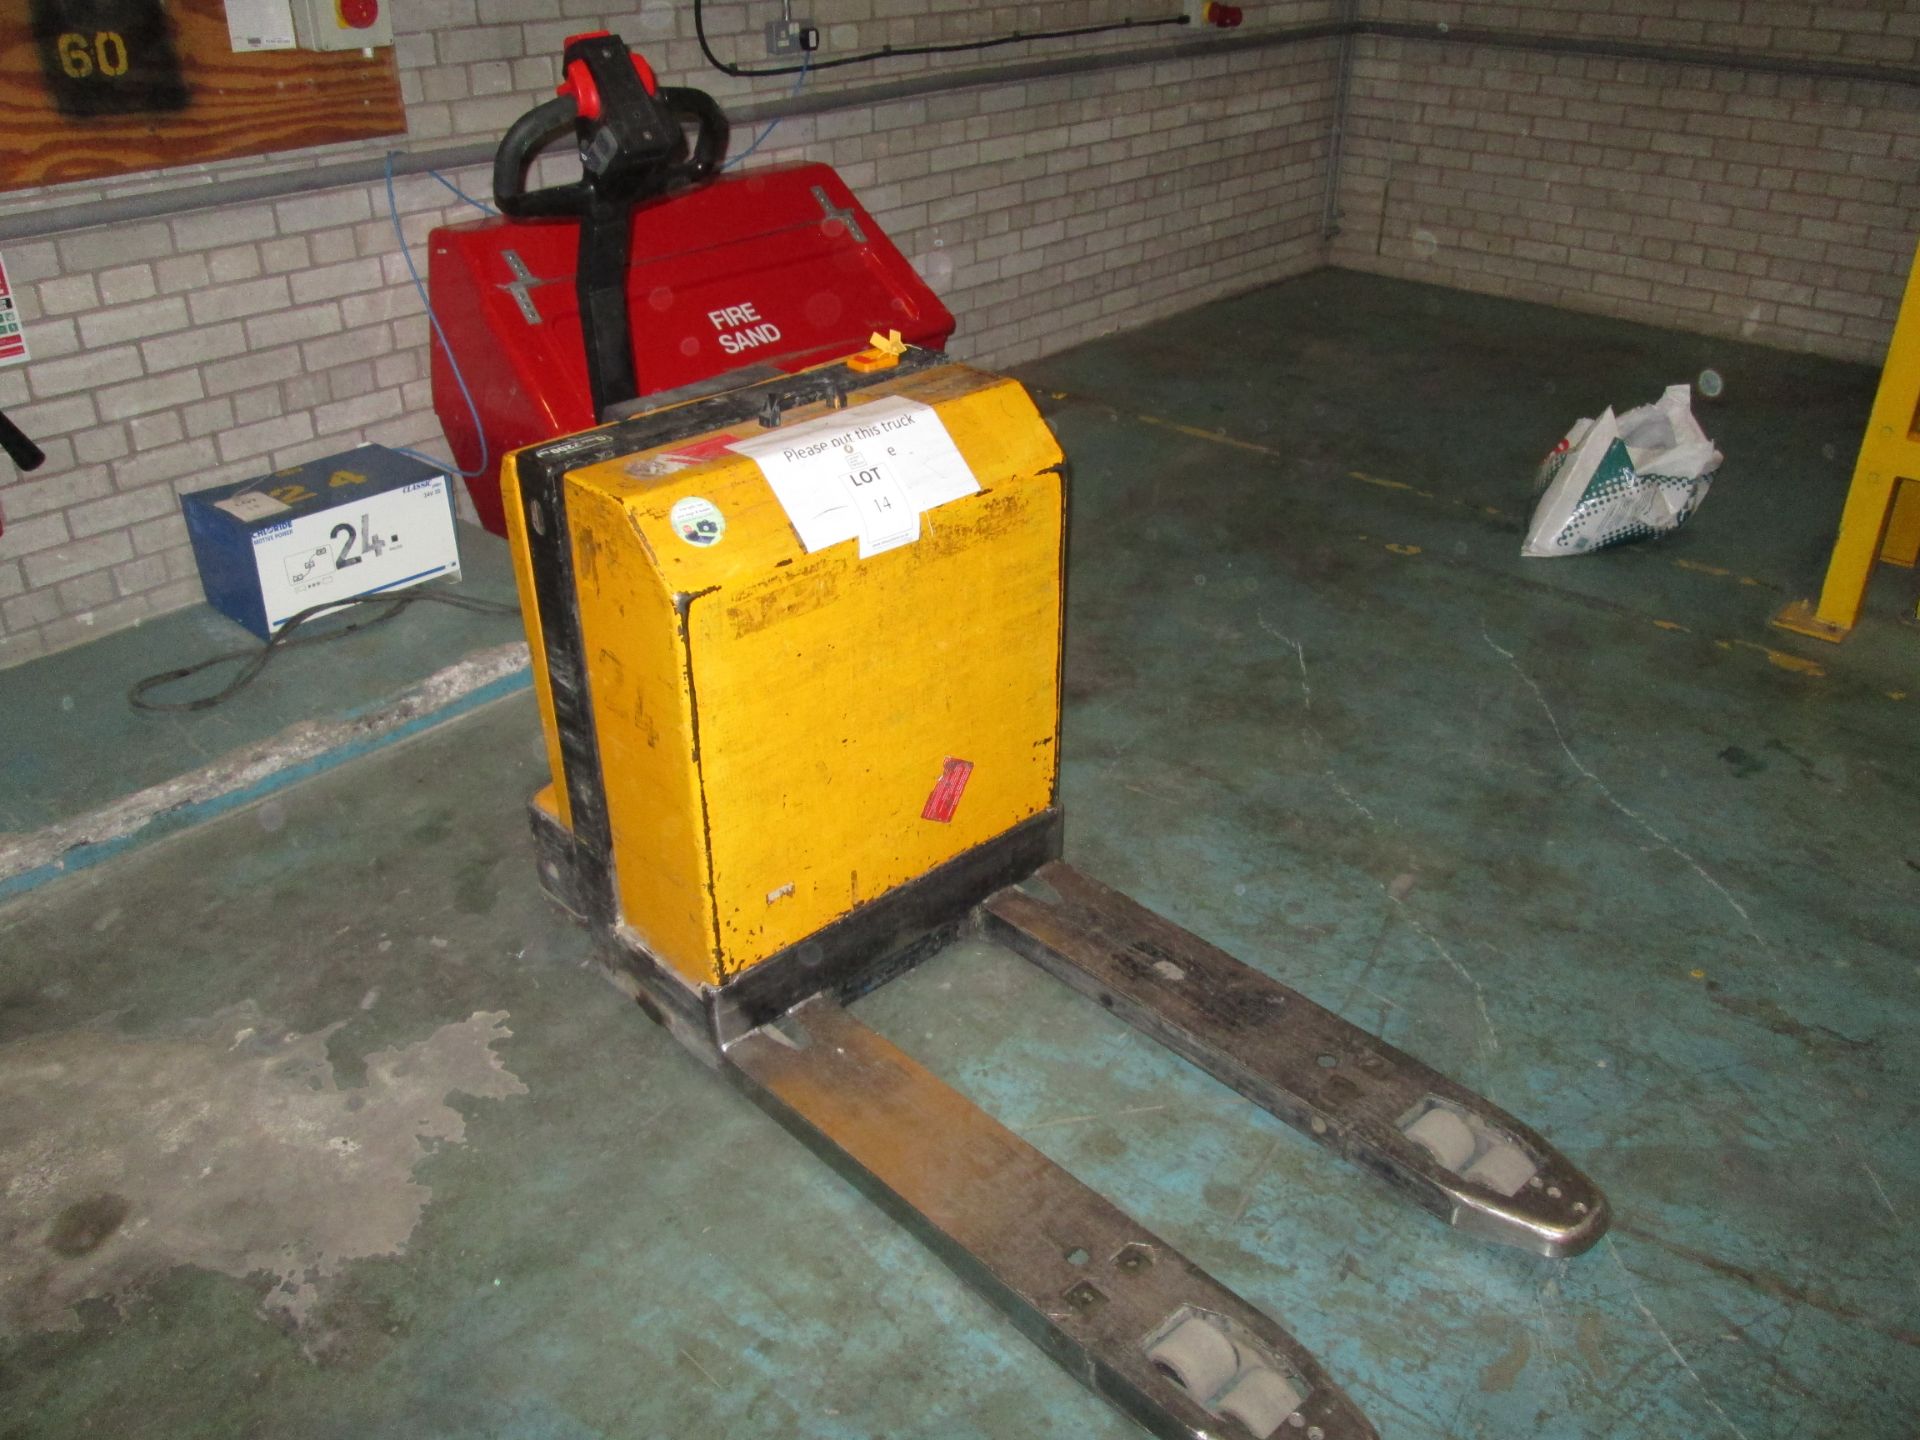 Jungheinrich EJE 22 electric pallet truck, s/n 80326775, with Chloride 24 charger, s/n AB 00930236. - Image 5 of 5